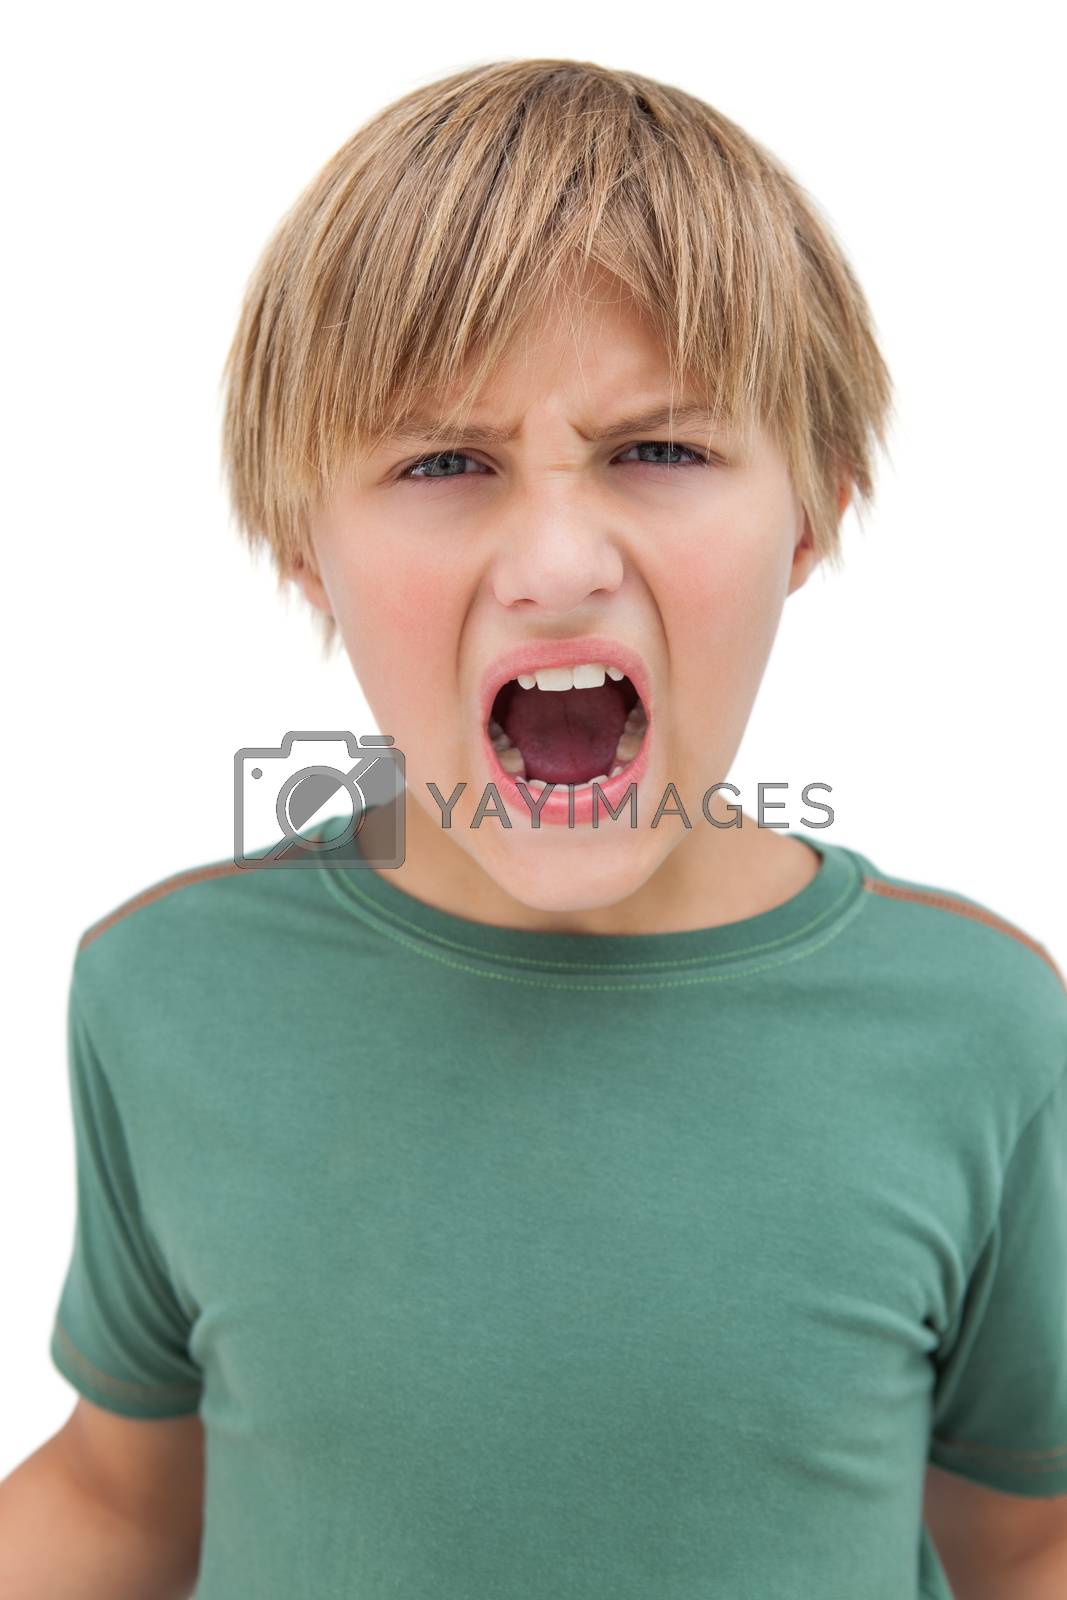 Royalty free image of Furious little boy shouting  by Wavebreakmedia